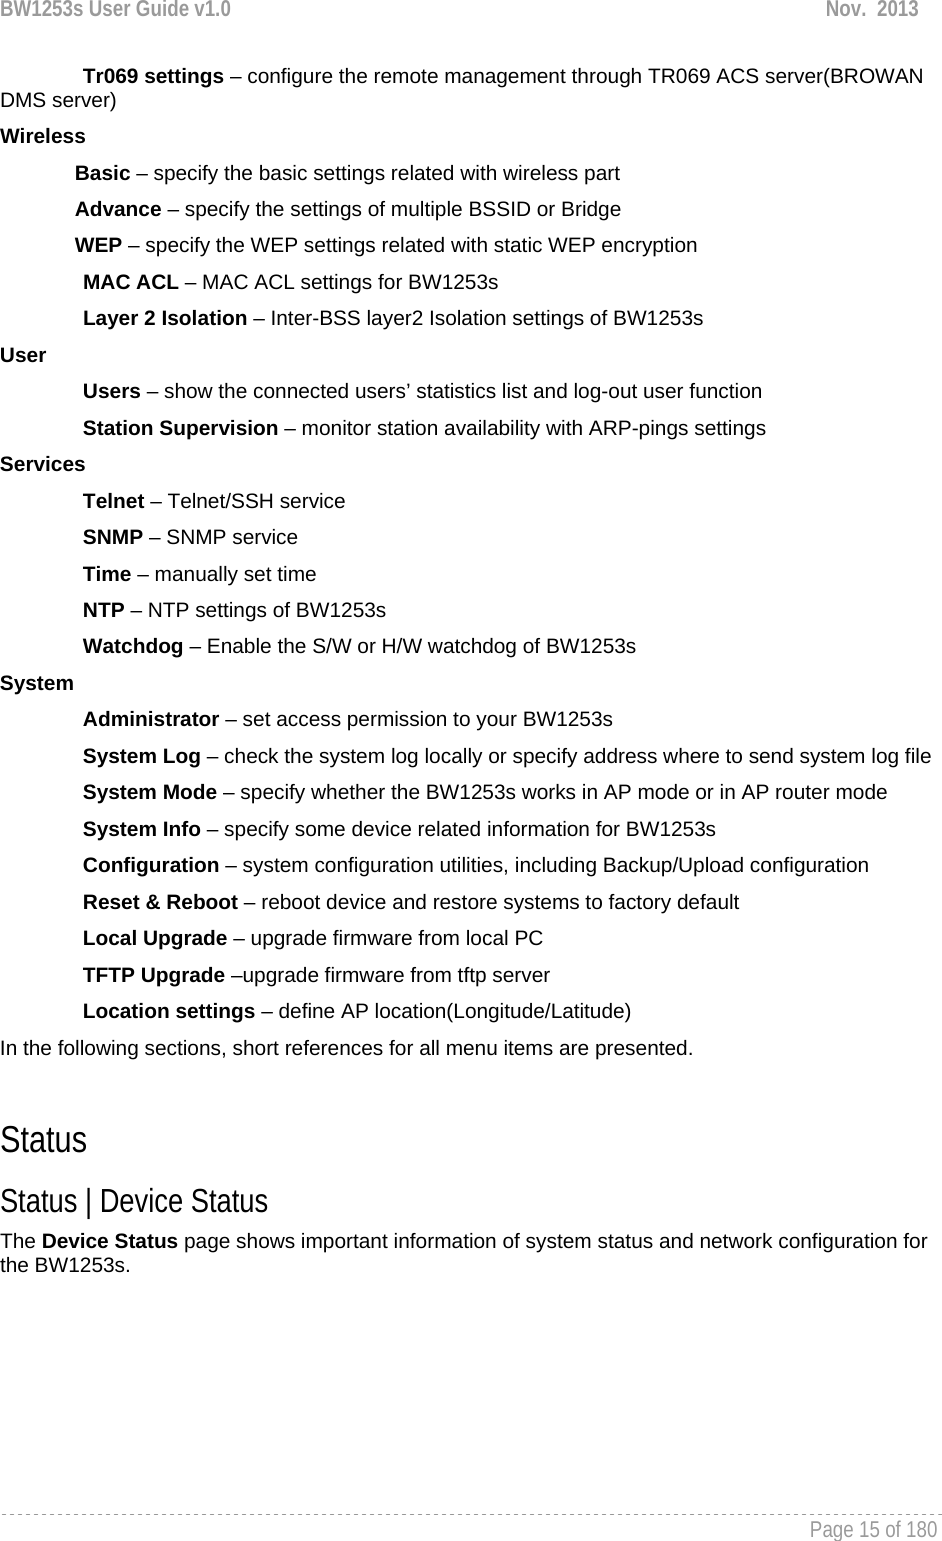 BW1253s User Guide v1.0  Nov.  2013     Page 15 of 180   Tr069 settings – configure the remote management through TR069 ACS server(BROWAN DMS server) Wireless Basic – specify the basic settings related with wireless part Advance – specify the settings of multiple BSSID or Bridge WEP – specify the WEP settings related with static WEP encryption MAC ACL – MAC ACL settings for BW1253s Layer 2 Isolation – Inter-BSS layer2 Isolation settings of BW1253s User Users – show the connected users’ statistics list and log-out user function Station Supervision – monitor station availability with ARP-pings settings Services Telnet – Telnet/SSH service SNMP – SNMP service Time – manually set time NTP – NTP settings of BW1253s Watchdog – Enable the S/W or H/W watchdog of BW1253s System Administrator – set access permission to your BW1253s System Log – check the system log locally or specify address where to send system log file System Mode – specify whether the BW1253s works in AP mode or in AP router mode System Info – specify some device related information for BW1253s Configuration – system configuration utilities, including Backup/Upload configuration Reset &amp; Reboot – reboot device and restore systems to factory default Local Upgrade – upgrade firmware from local PC TFTP Upgrade –upgrade firmware from tftp server Location settings – define AP location(Longitude/Latitude) In the following sections, short references for all menu items are presented.  Status Status | Device Status The Device Status page shows important information of system status and network configuration for the BW1253s. 